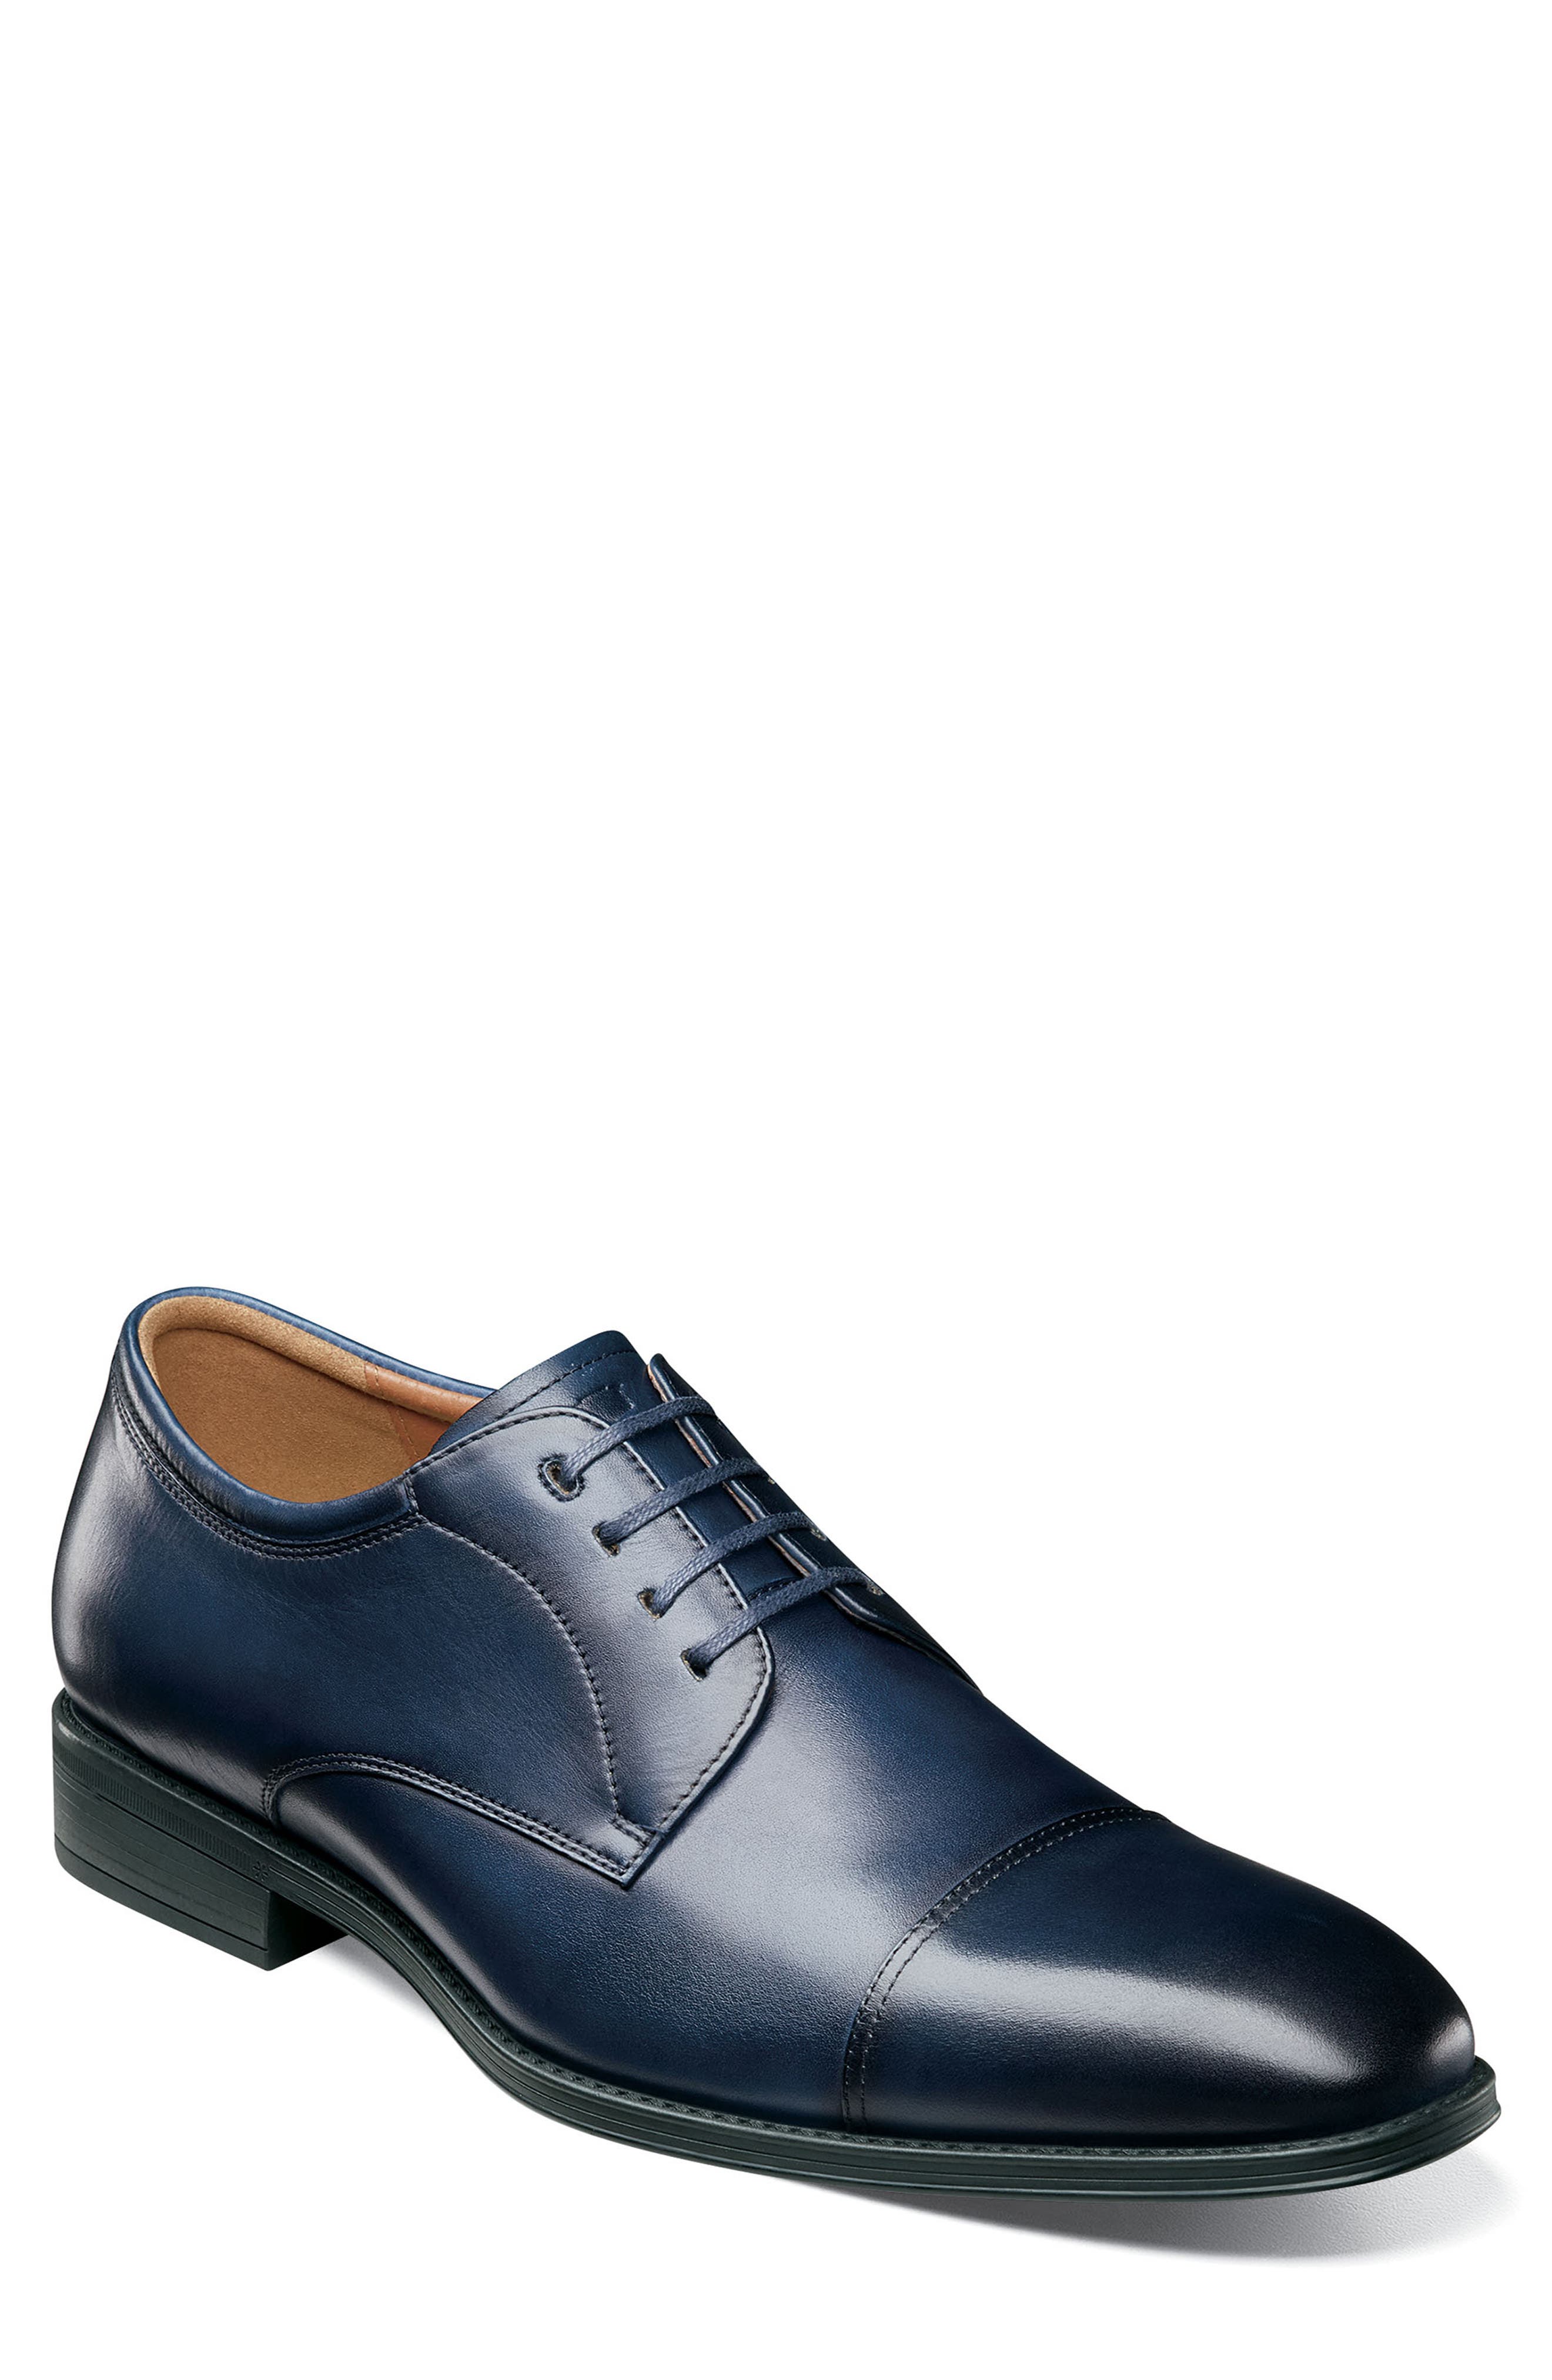 leather casual dress shoes